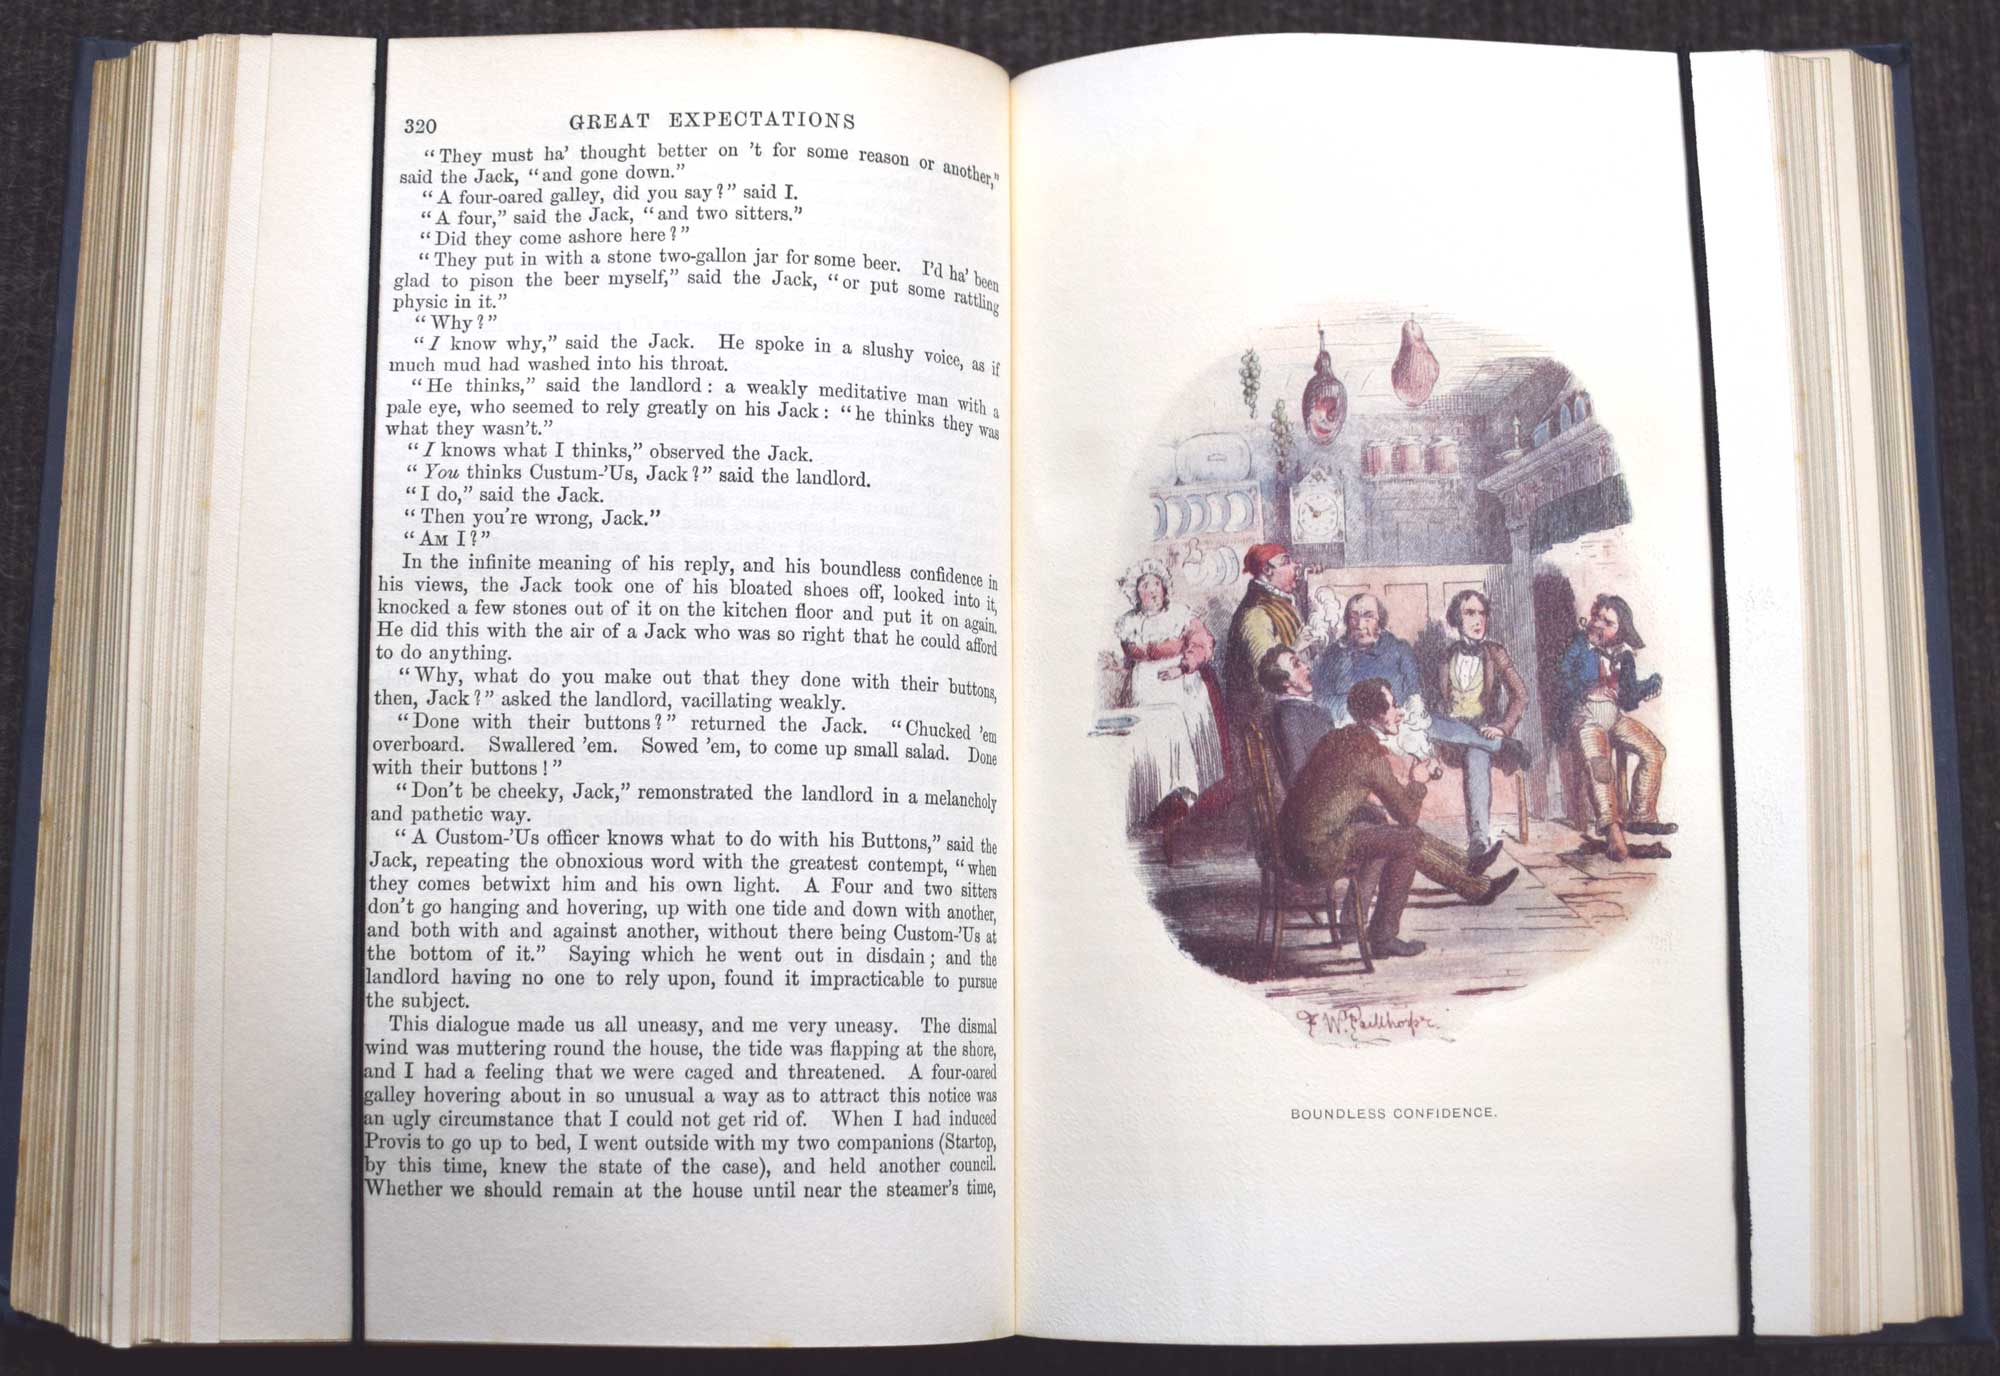 The Works of Charles Dickens. The London Edition. With Illustrations by Cruikshank, Phiz &c. 14 volume set. Caxton.